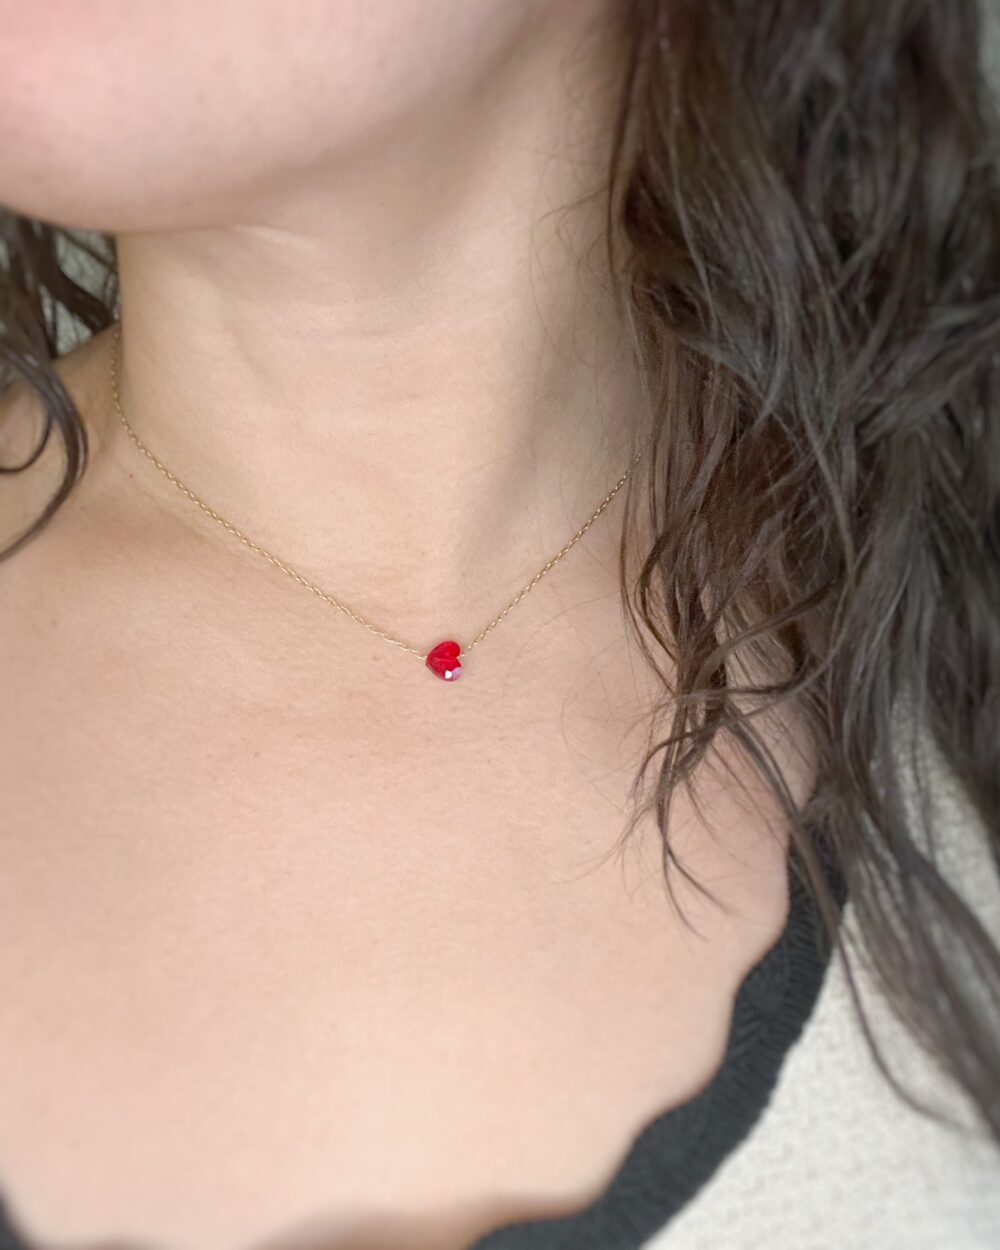 The Ruby Heart Necklace | Ruby heart necklace, Heart shaped jewelry, Heart  necklace